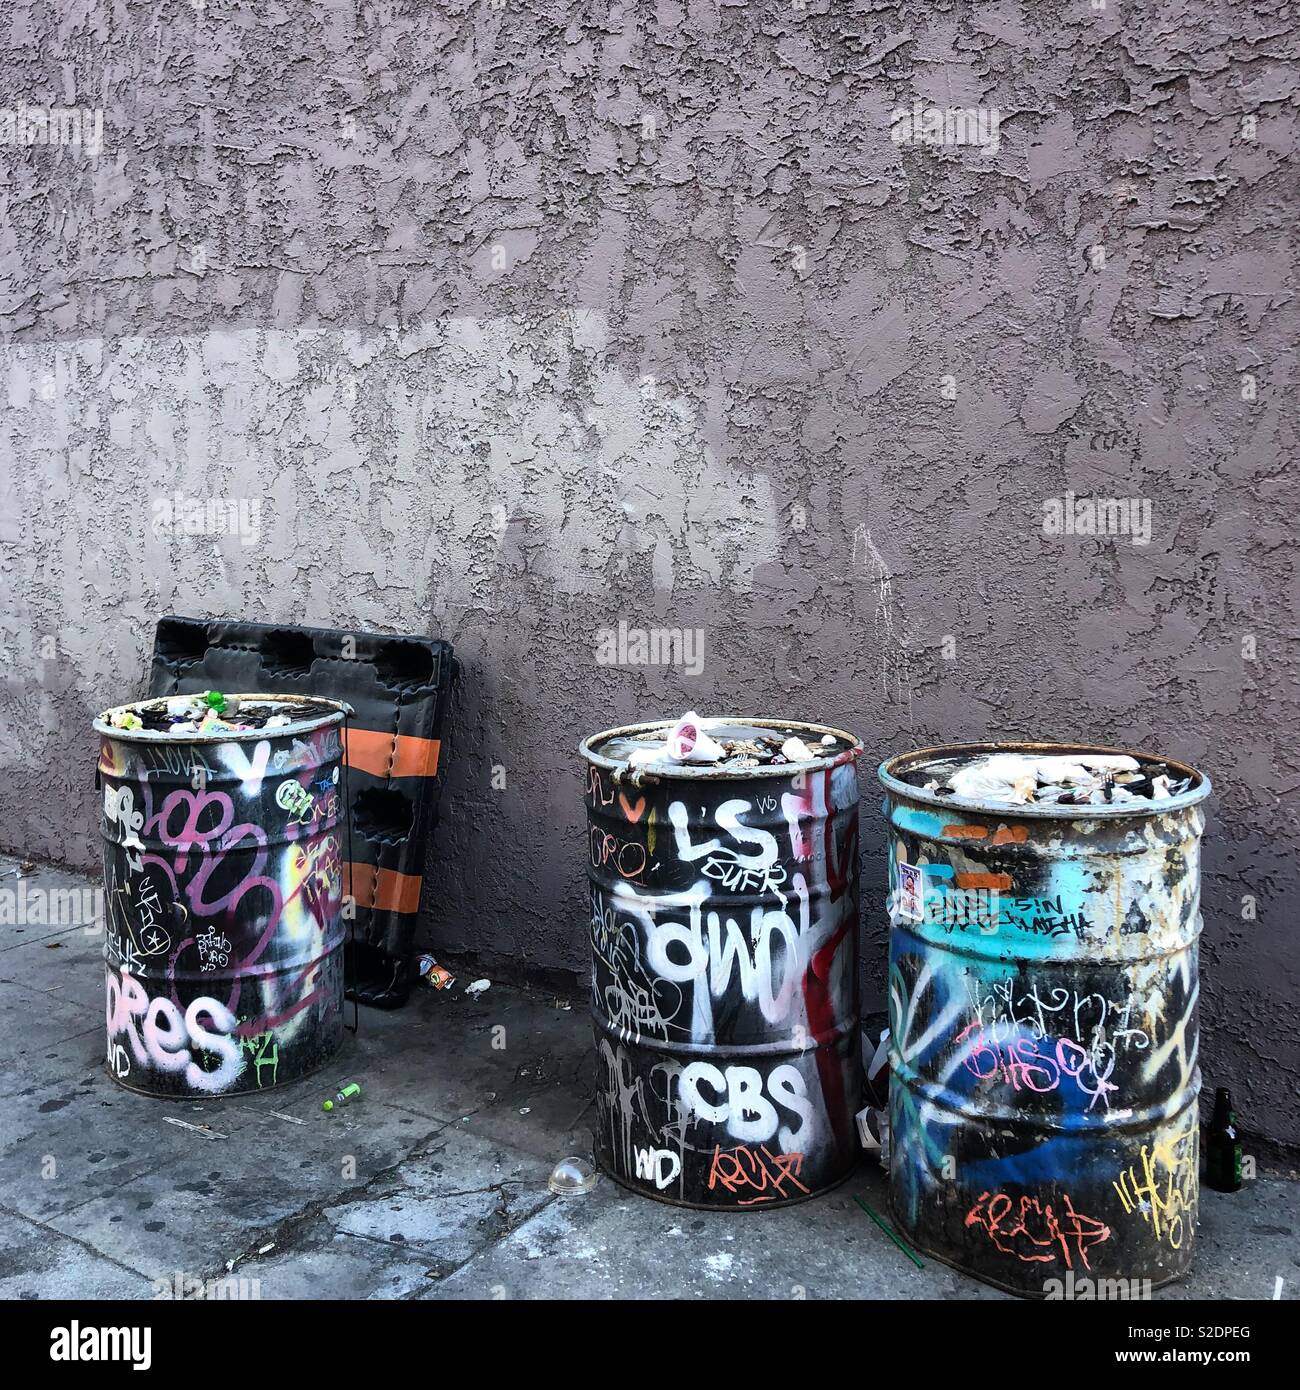 https://c8.alamy.com/comp/S2DPEG/graffiti-covered-trash-cans-against-a-wall-in-an-alley-S2DPEG.jpg